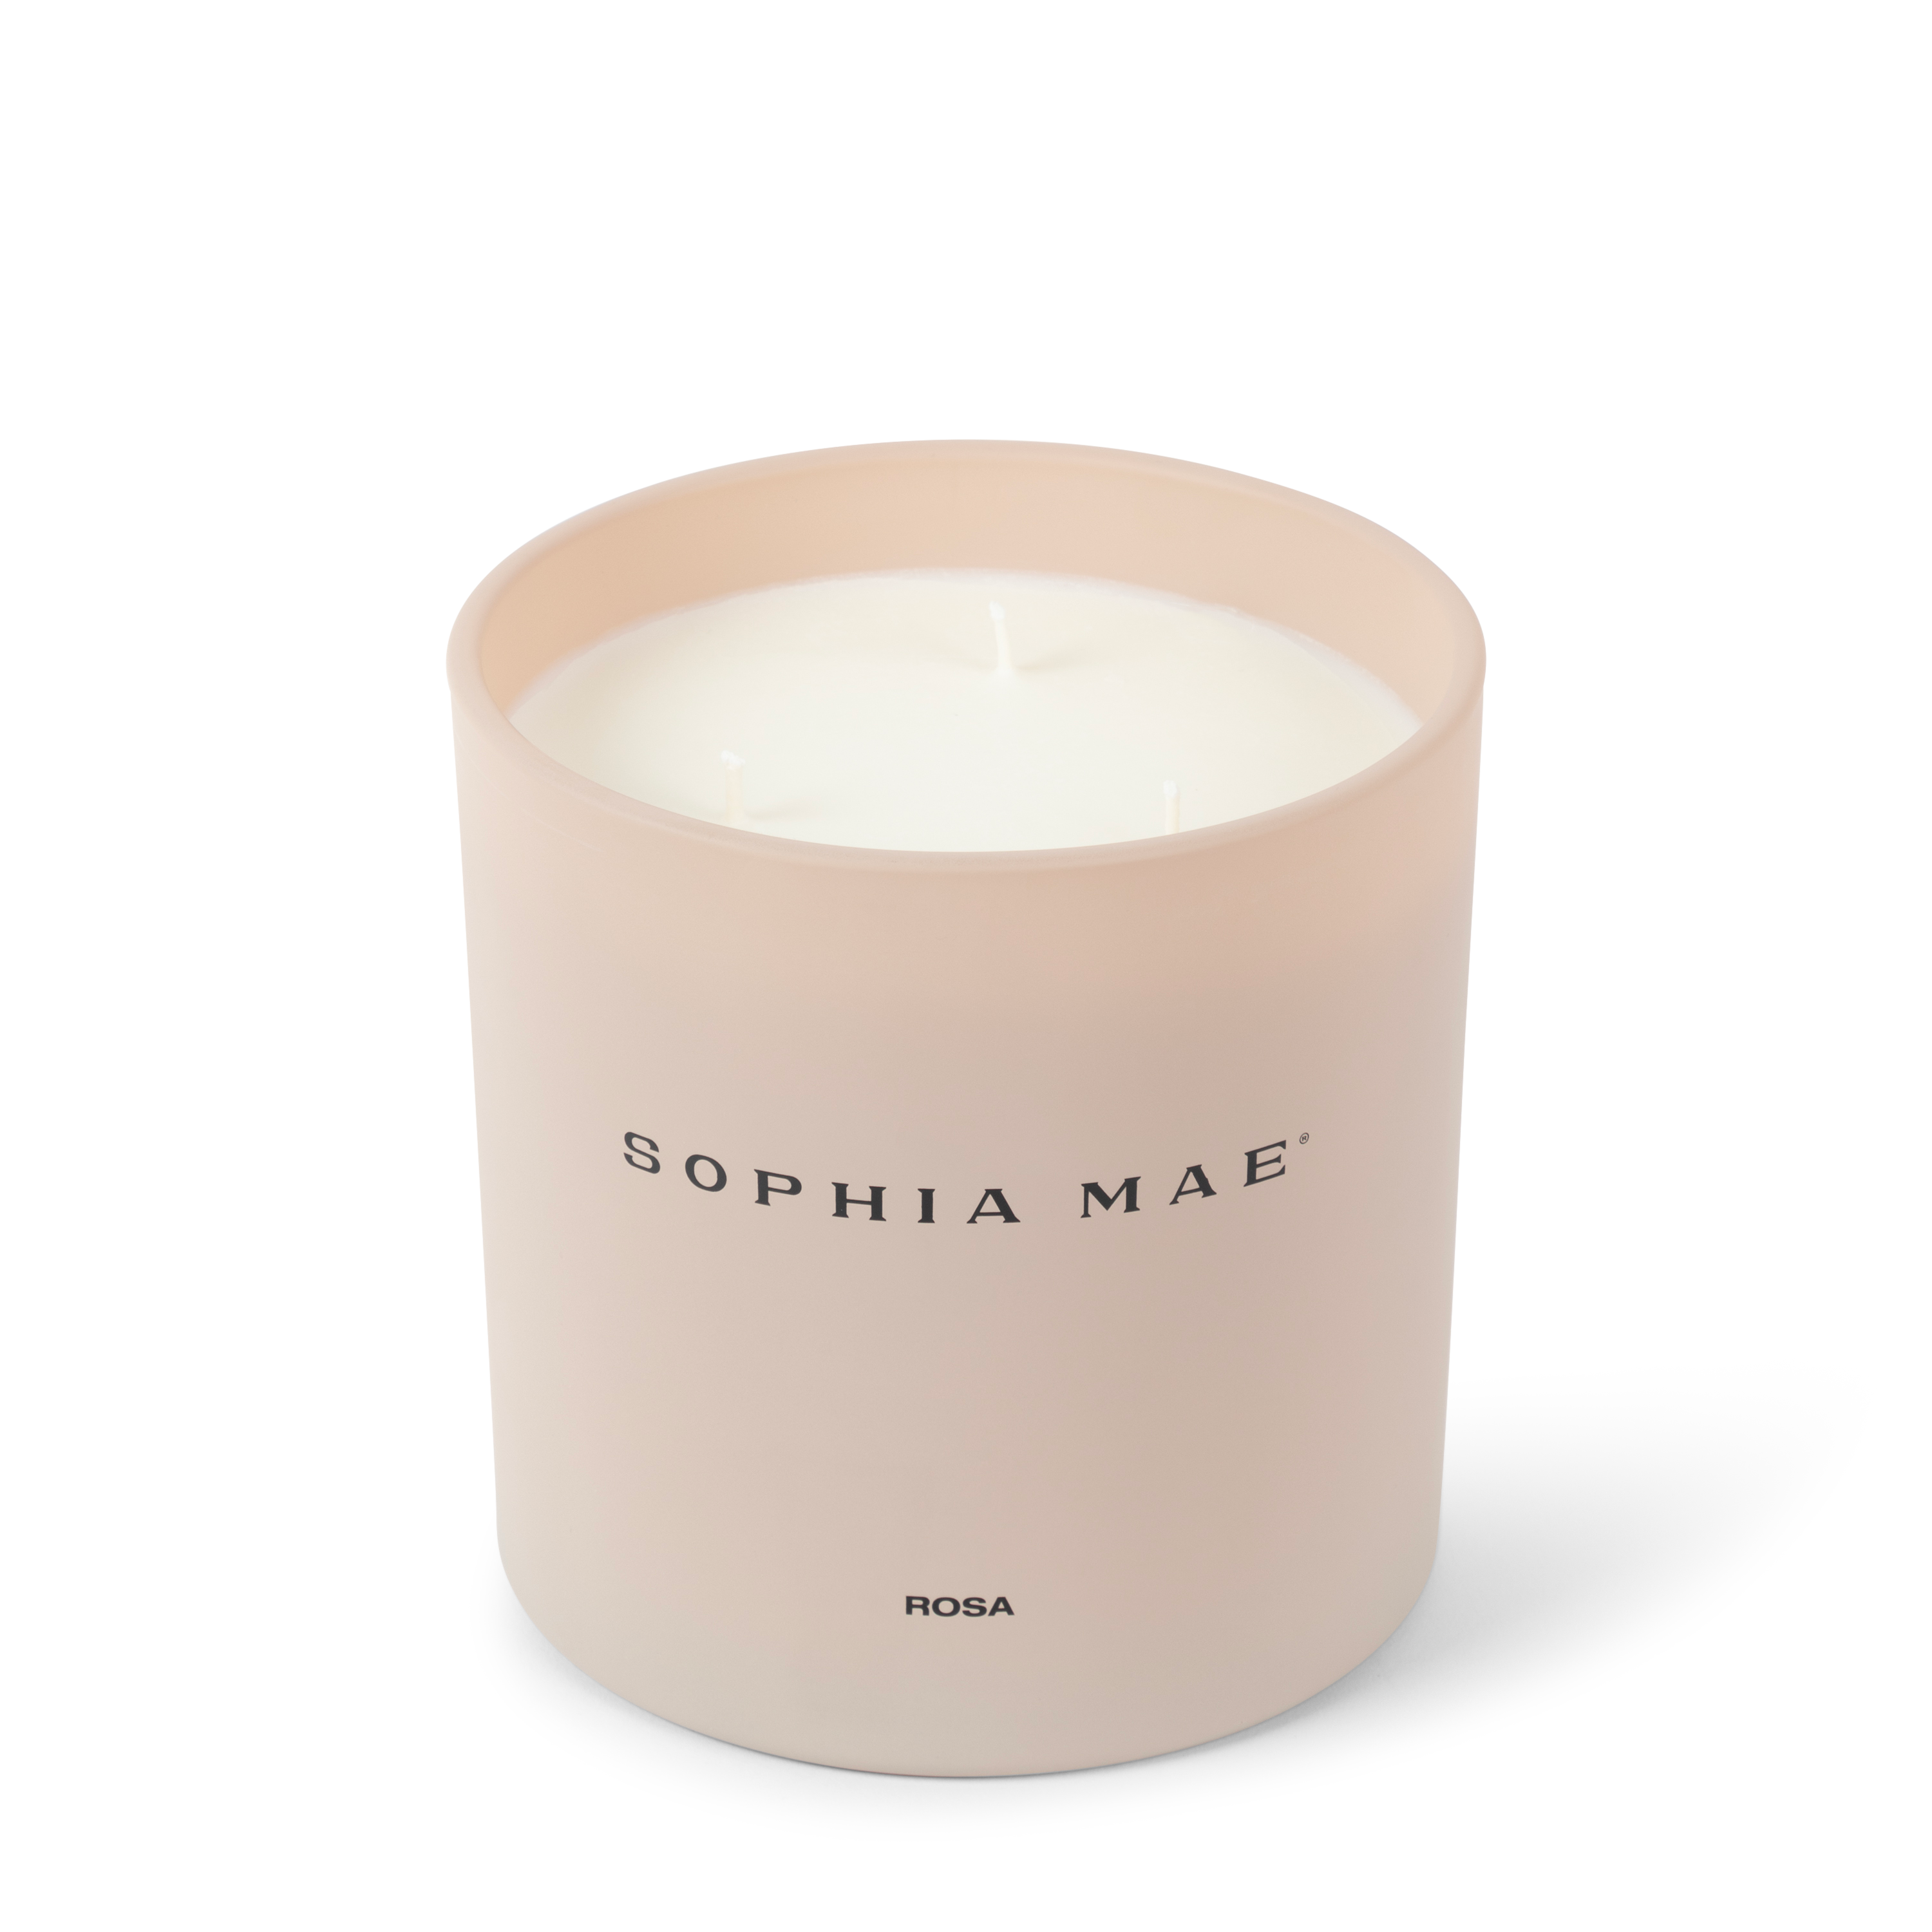 ROSA SCENTED CANDLE MAXI | SOPHIA MAE by Monica Geuze